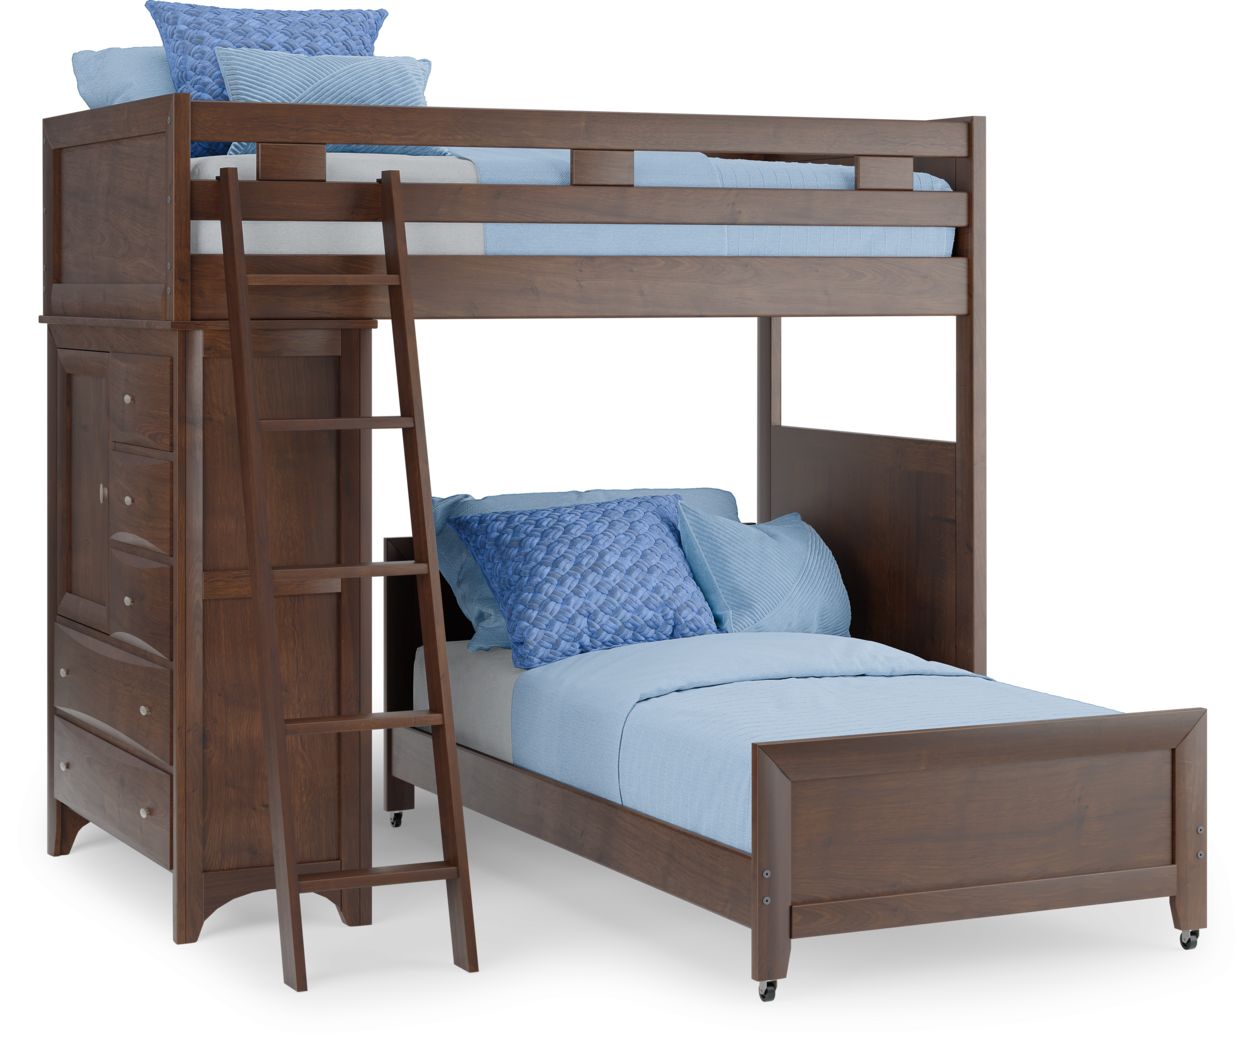 Ivy League Furniture Collection, Ercole Full Mate S Bed With 12 Drawers And Bookcase